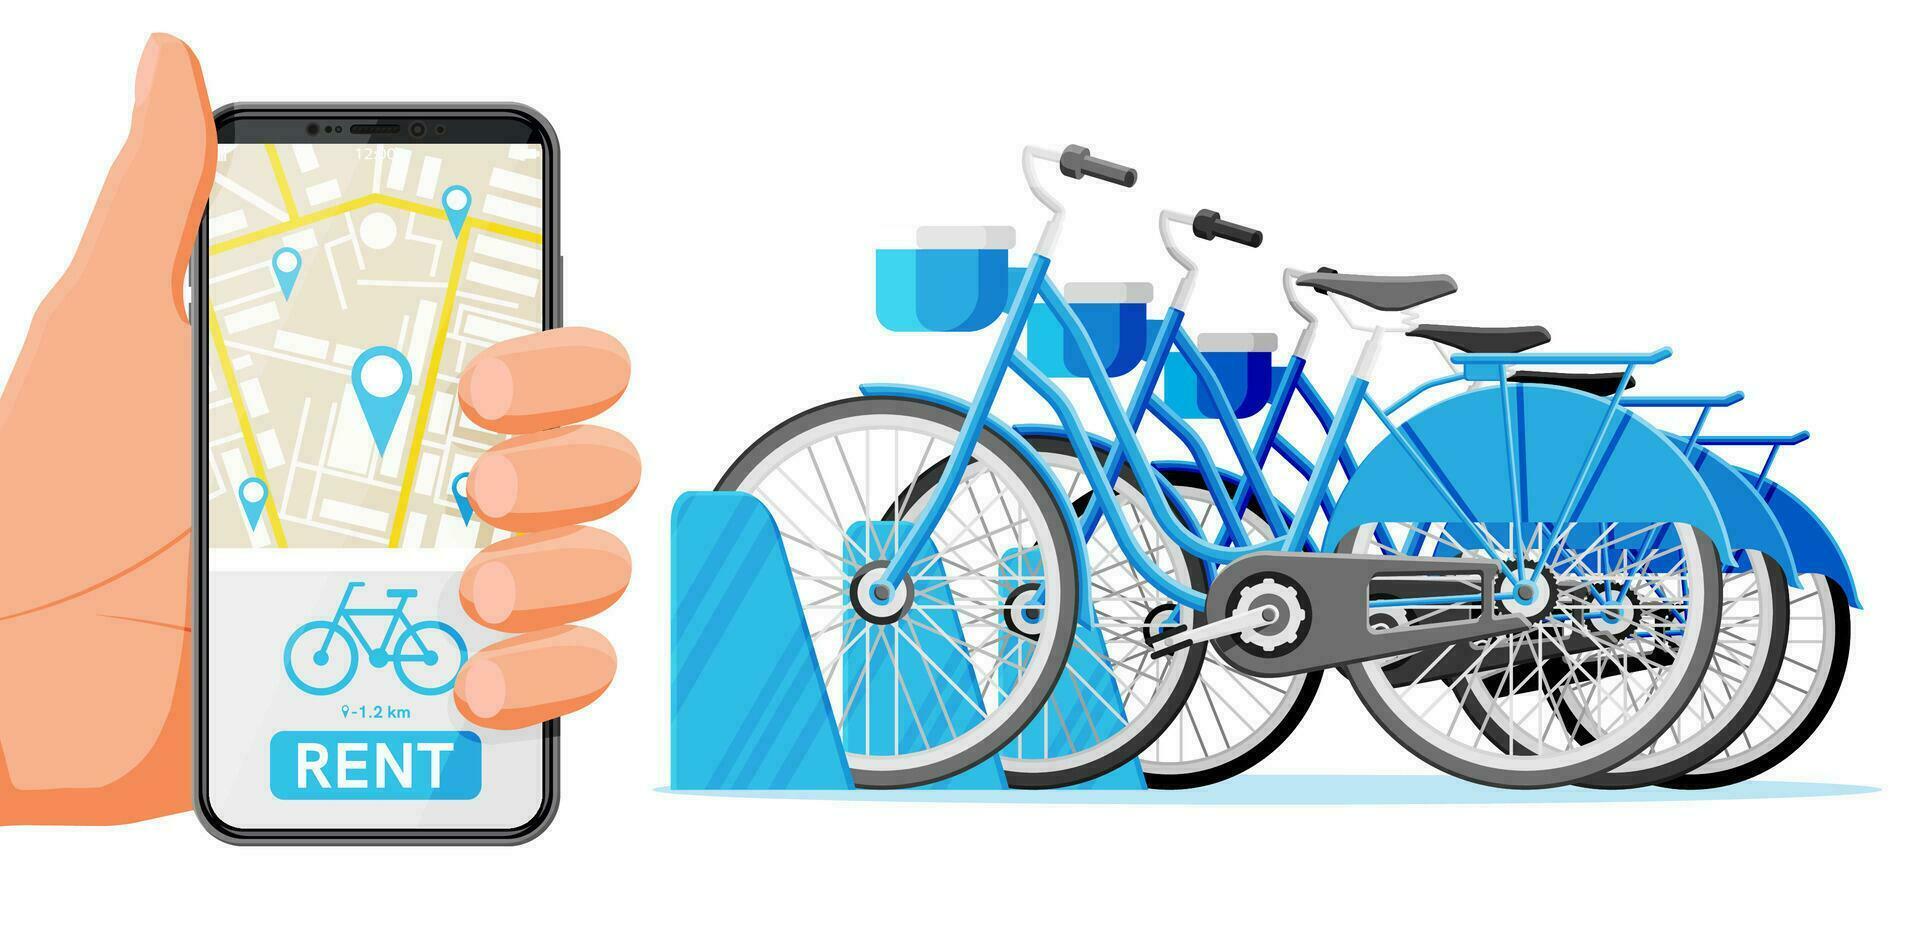 City Bicycle Sharing System Isolated on White. Bike Stand with Rental Bicycles. Bike on Docking Station and Smartphone. Urban Transportation Smart Service. Cartoon Flat Vector Illustration